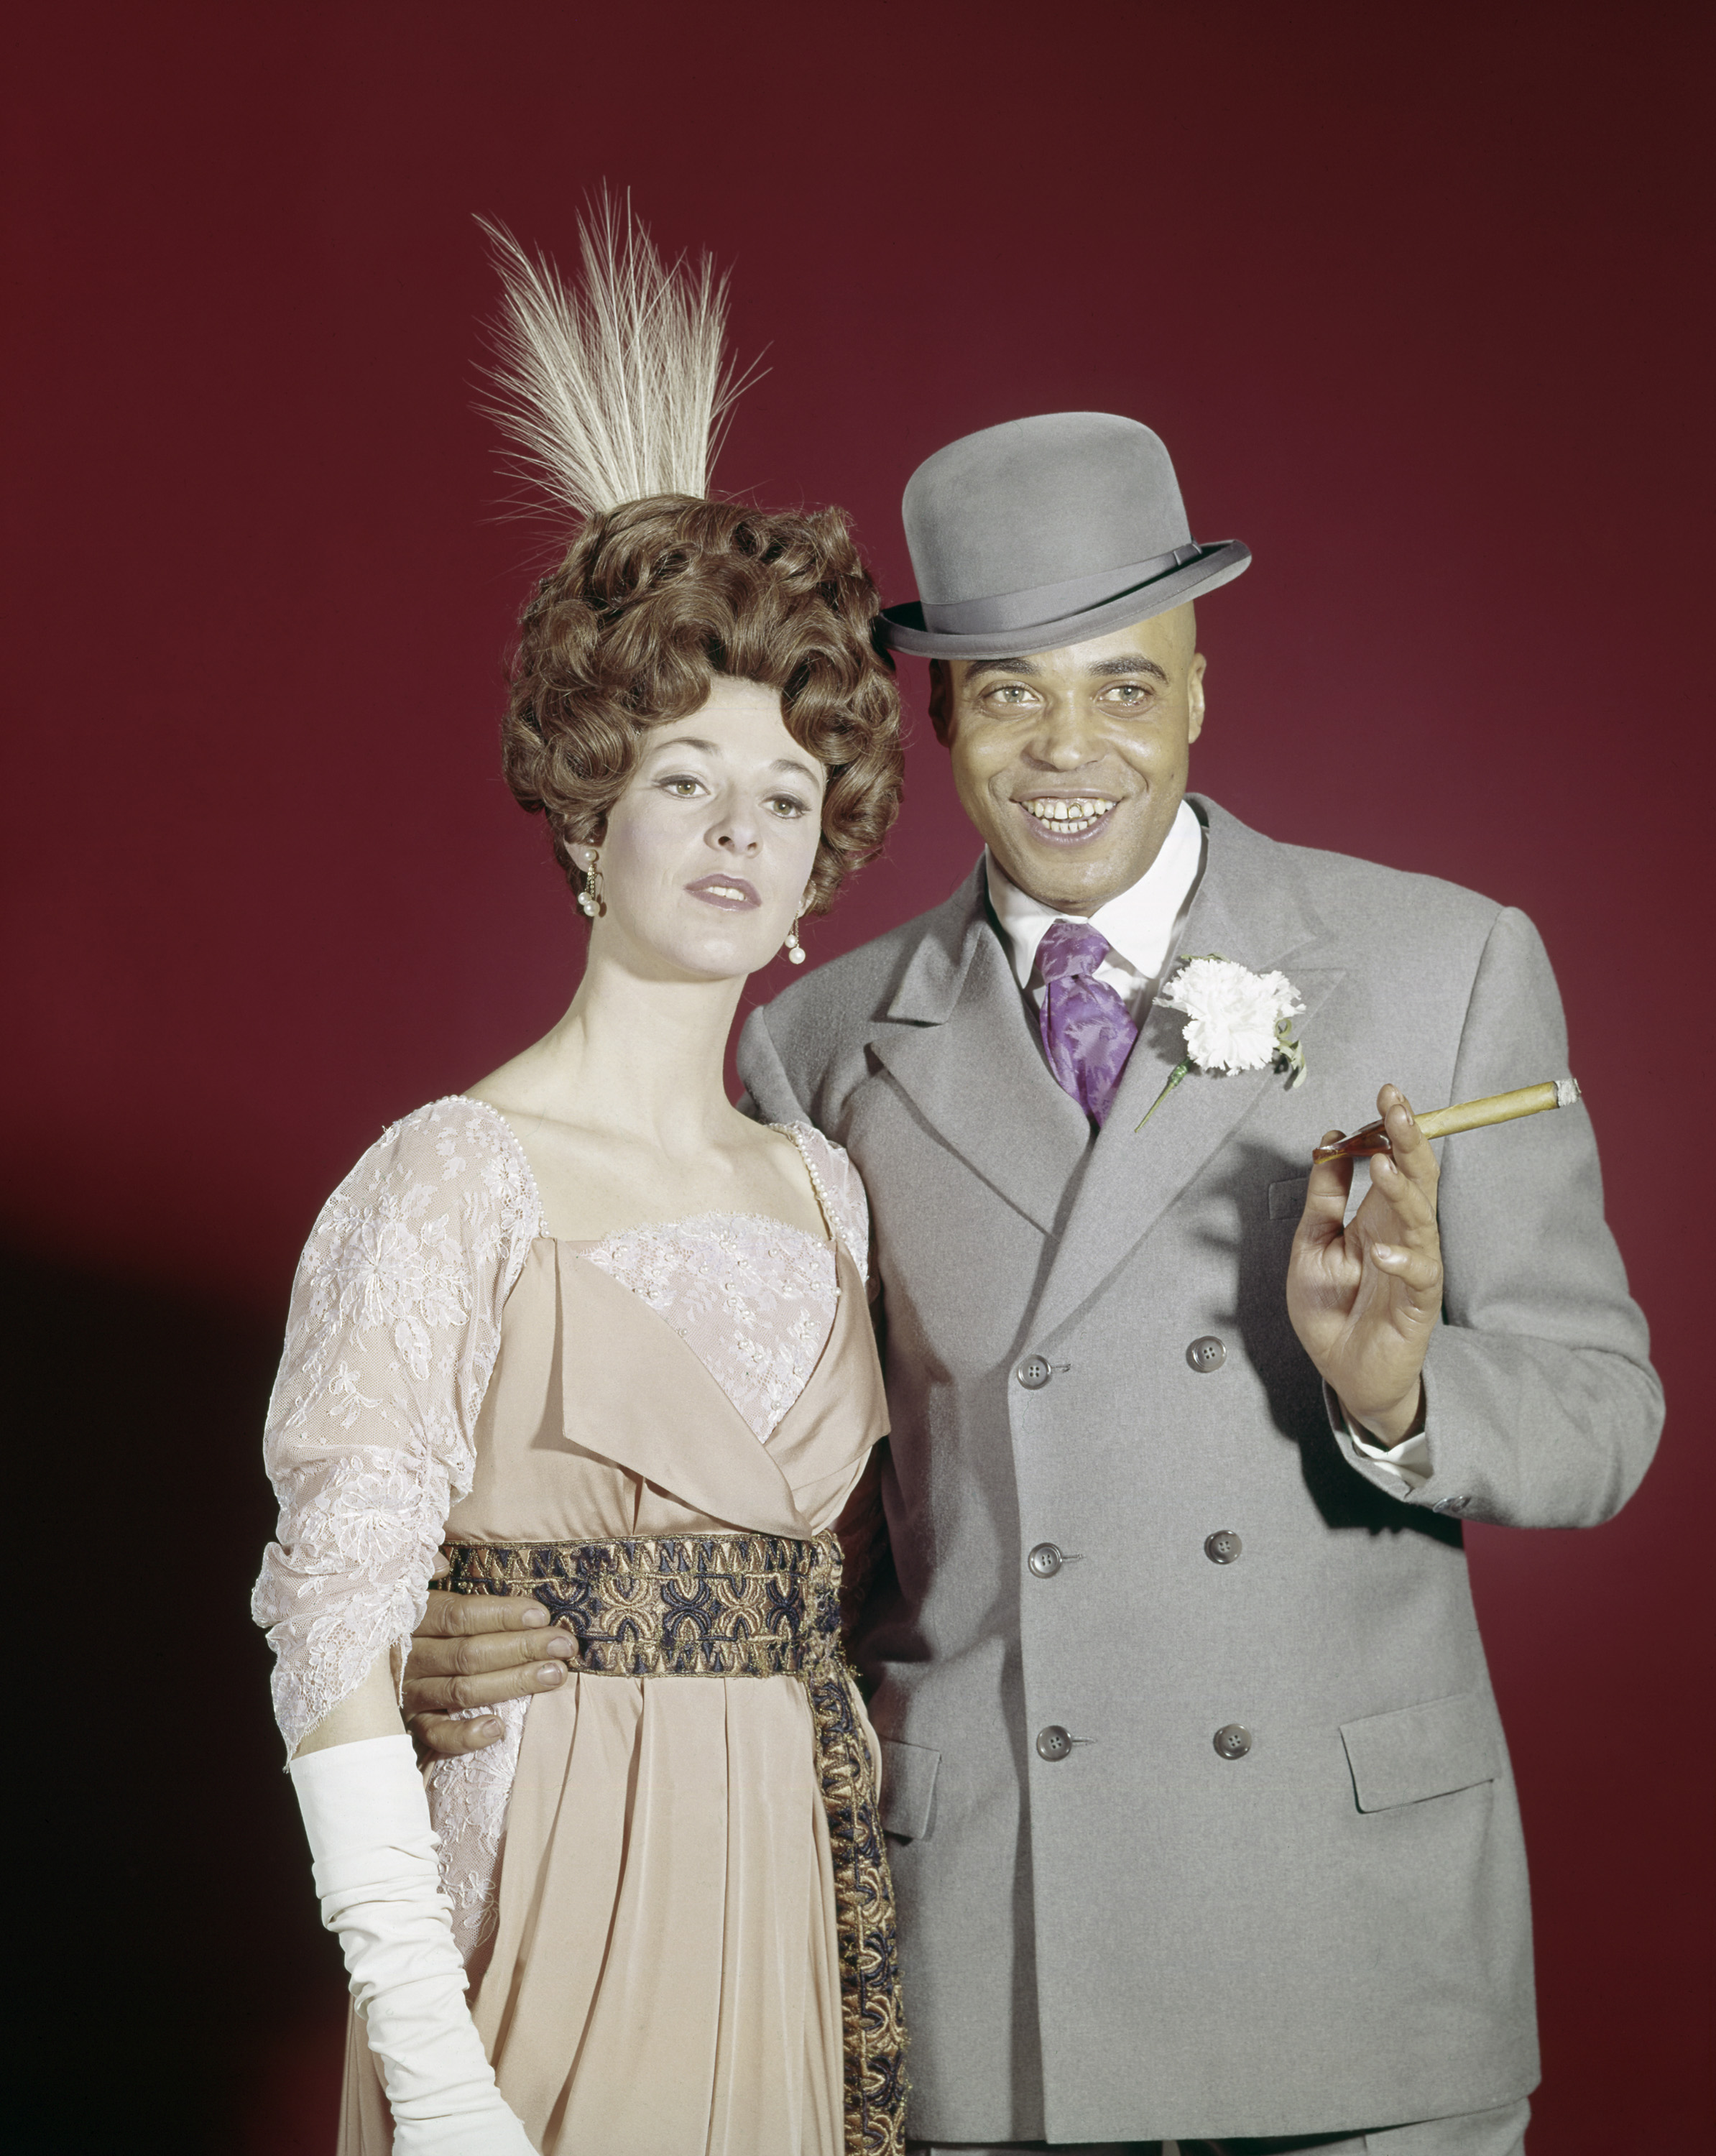 Best Play Nominee for "The Great White Hope" actress Jane Alexander as Eleanor Bachman and actor James Earl Jones as Jack Jefferson at the 23rd Annual Tony Awards | Source: Getty Images